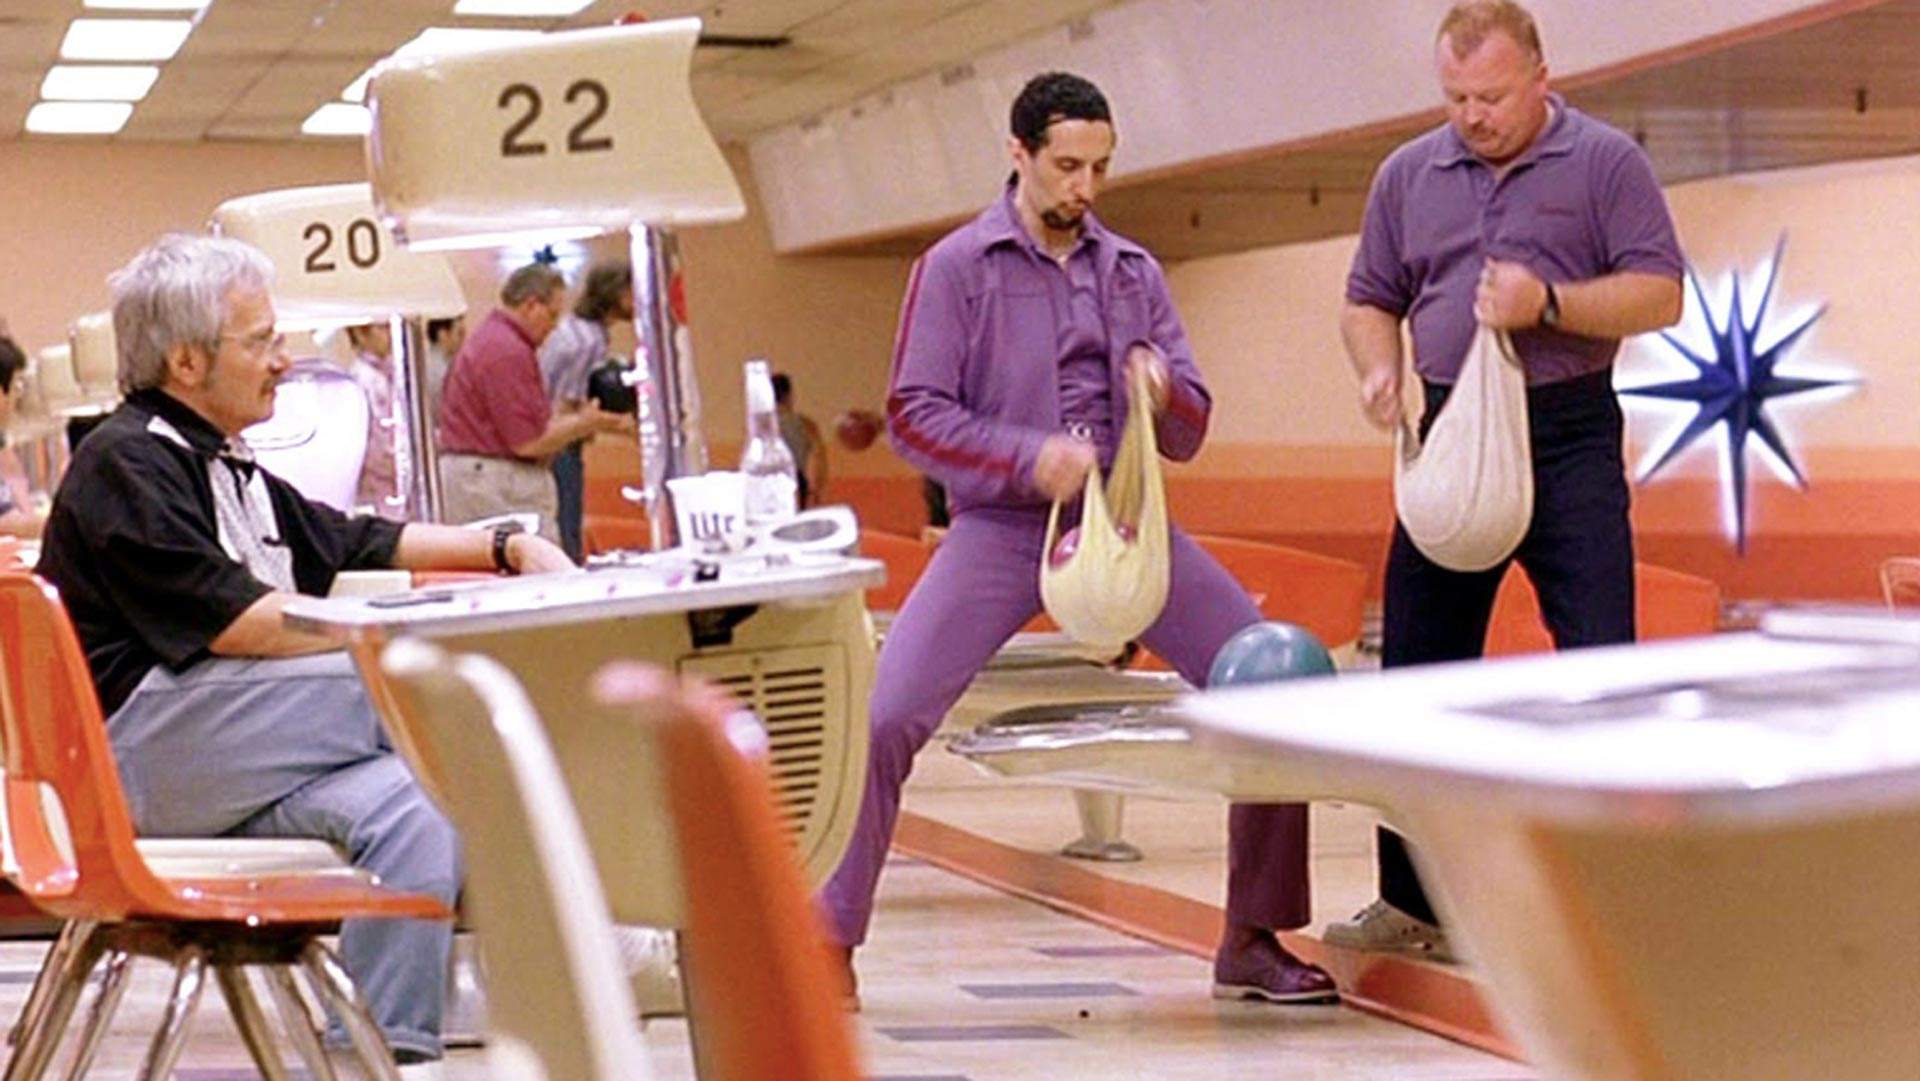 The Long-Awaited Sequel to 'The Big Lebowski' Will Finally Hit Cinemas Next Year